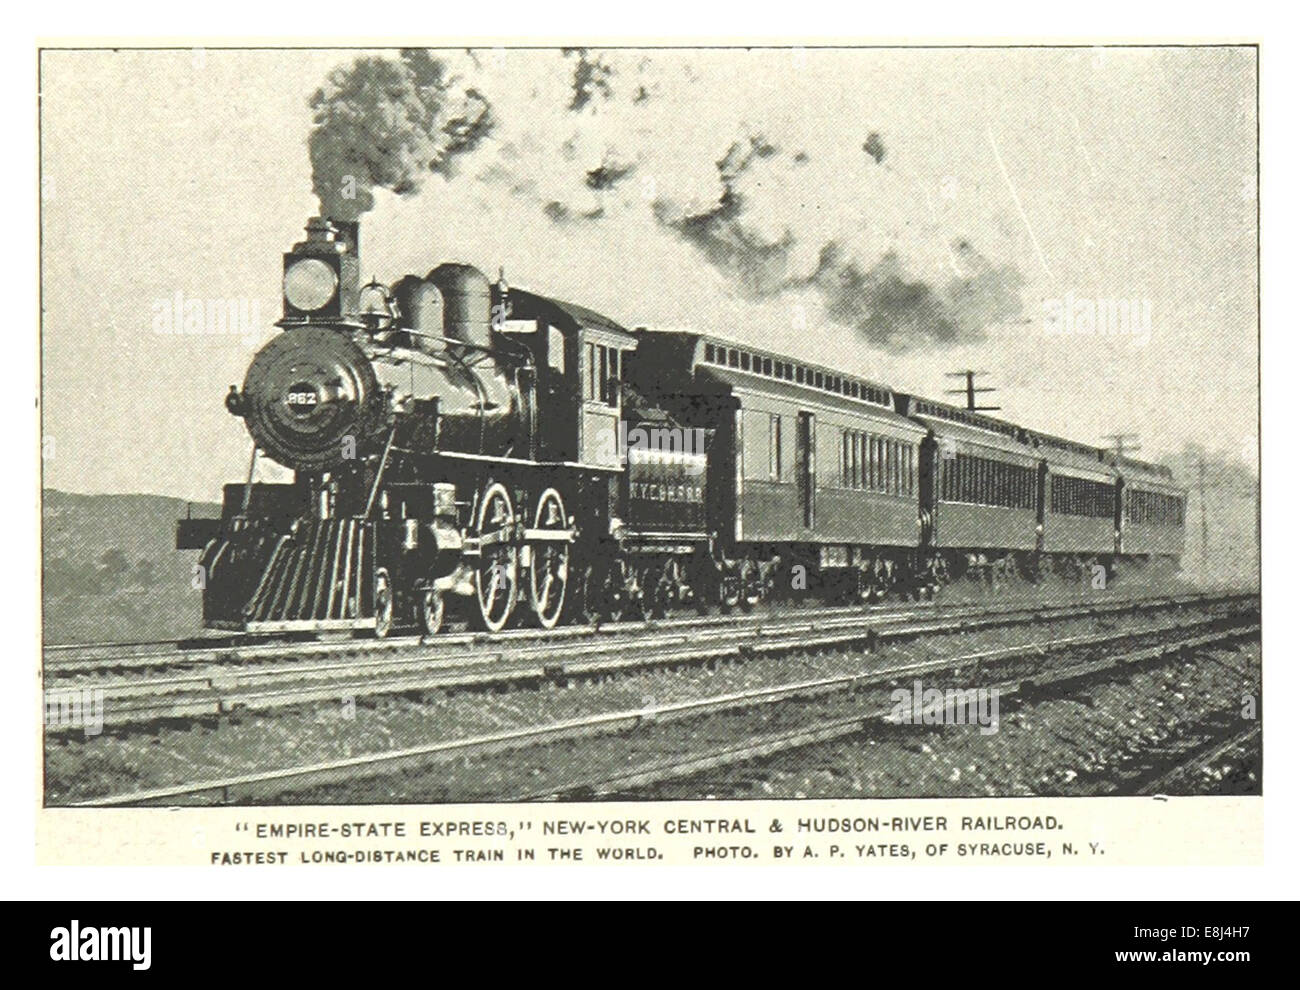 (Re1893NYC) PG119 EMPIRE STATE EXPRESS, NEW-YORK CENTRAL & Hudson-RIVER RAILROAD Foto Stock